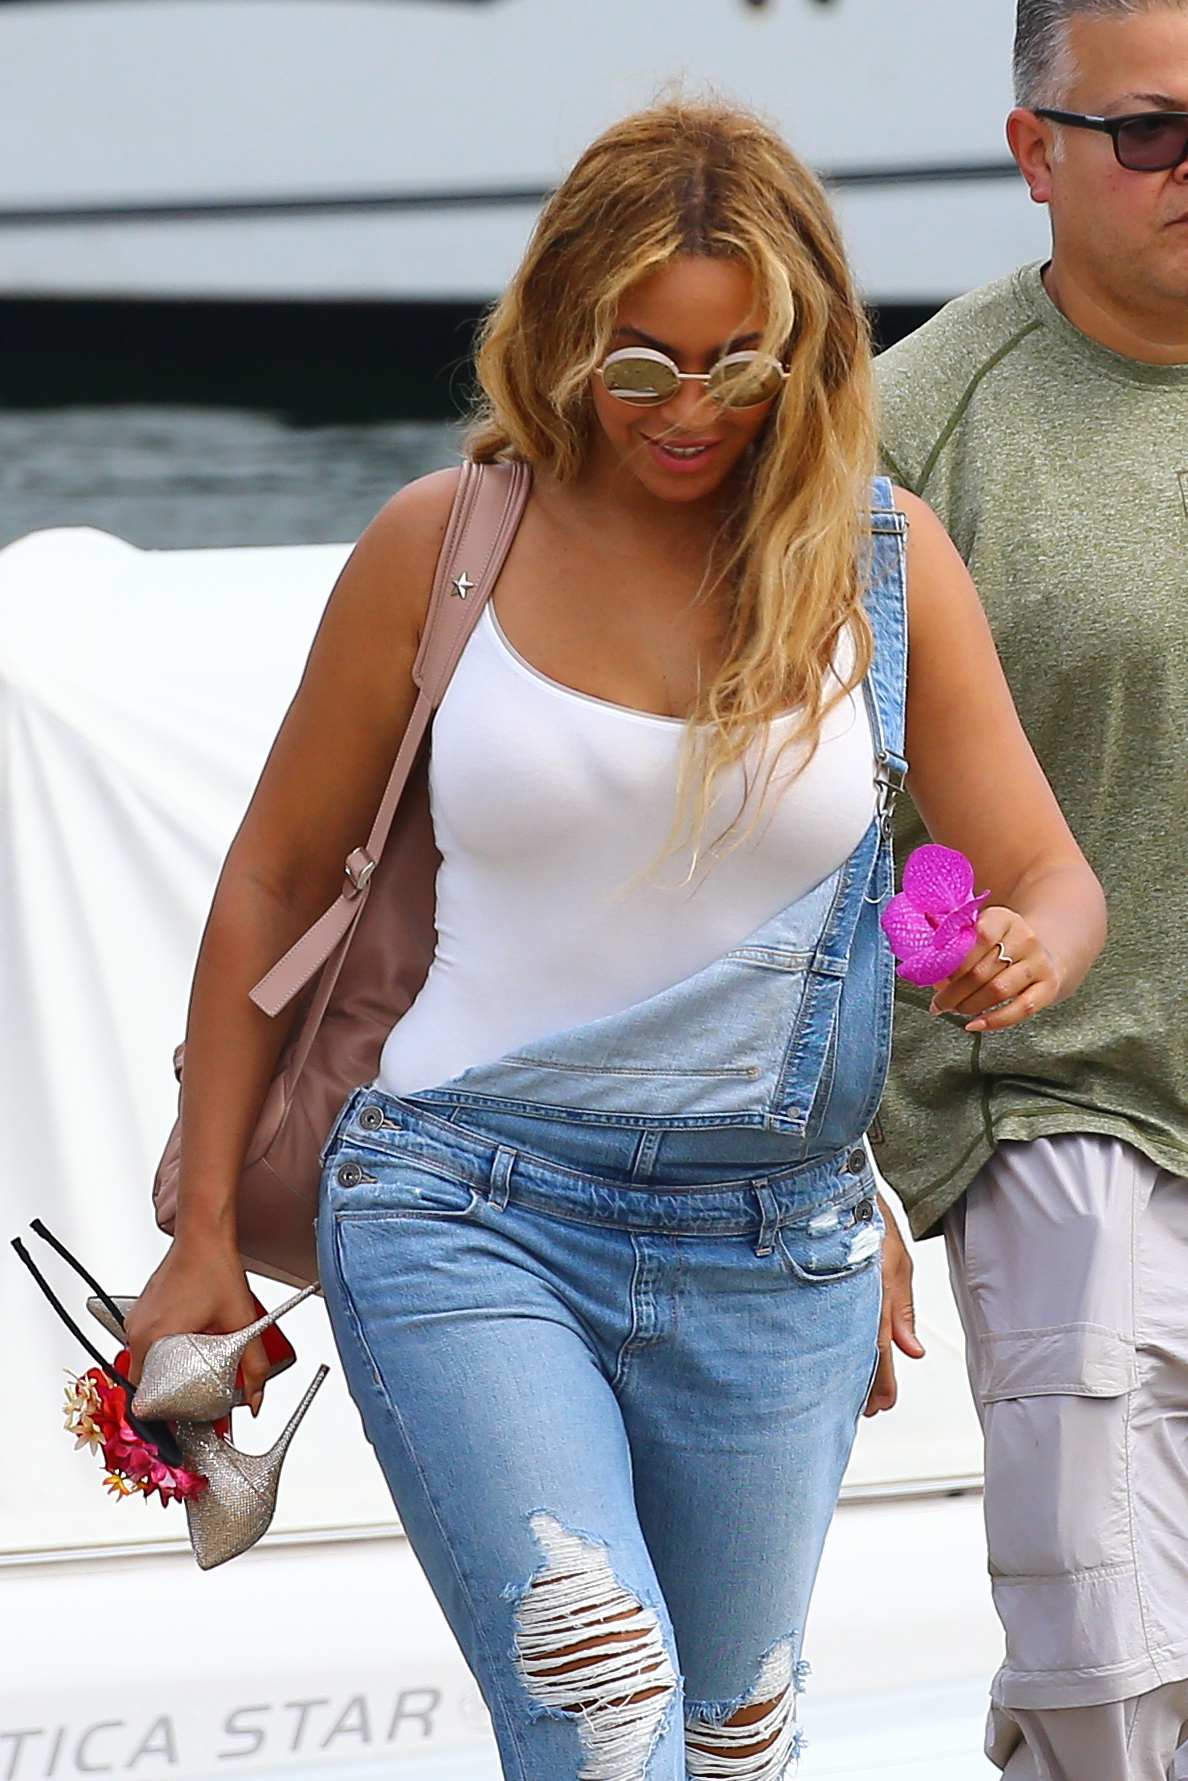 Beyonce and Jay-Z Vacation With Their Daughter in Southern France